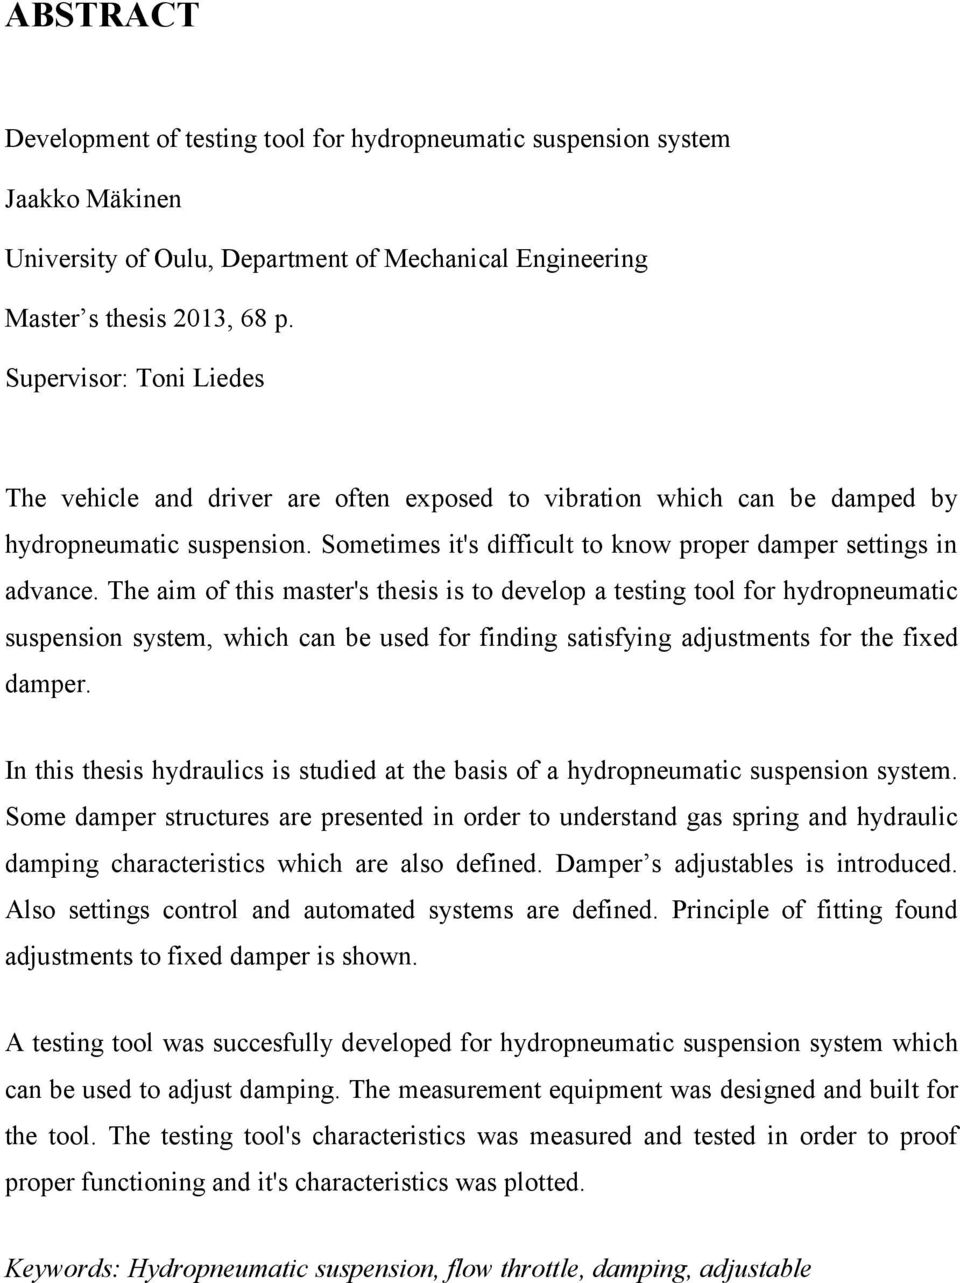 The aim of this master's thesis is to develop a testing tool for hydropneumatic suspension system, which can be used for finding satisfying adjustments for the fixed damper.